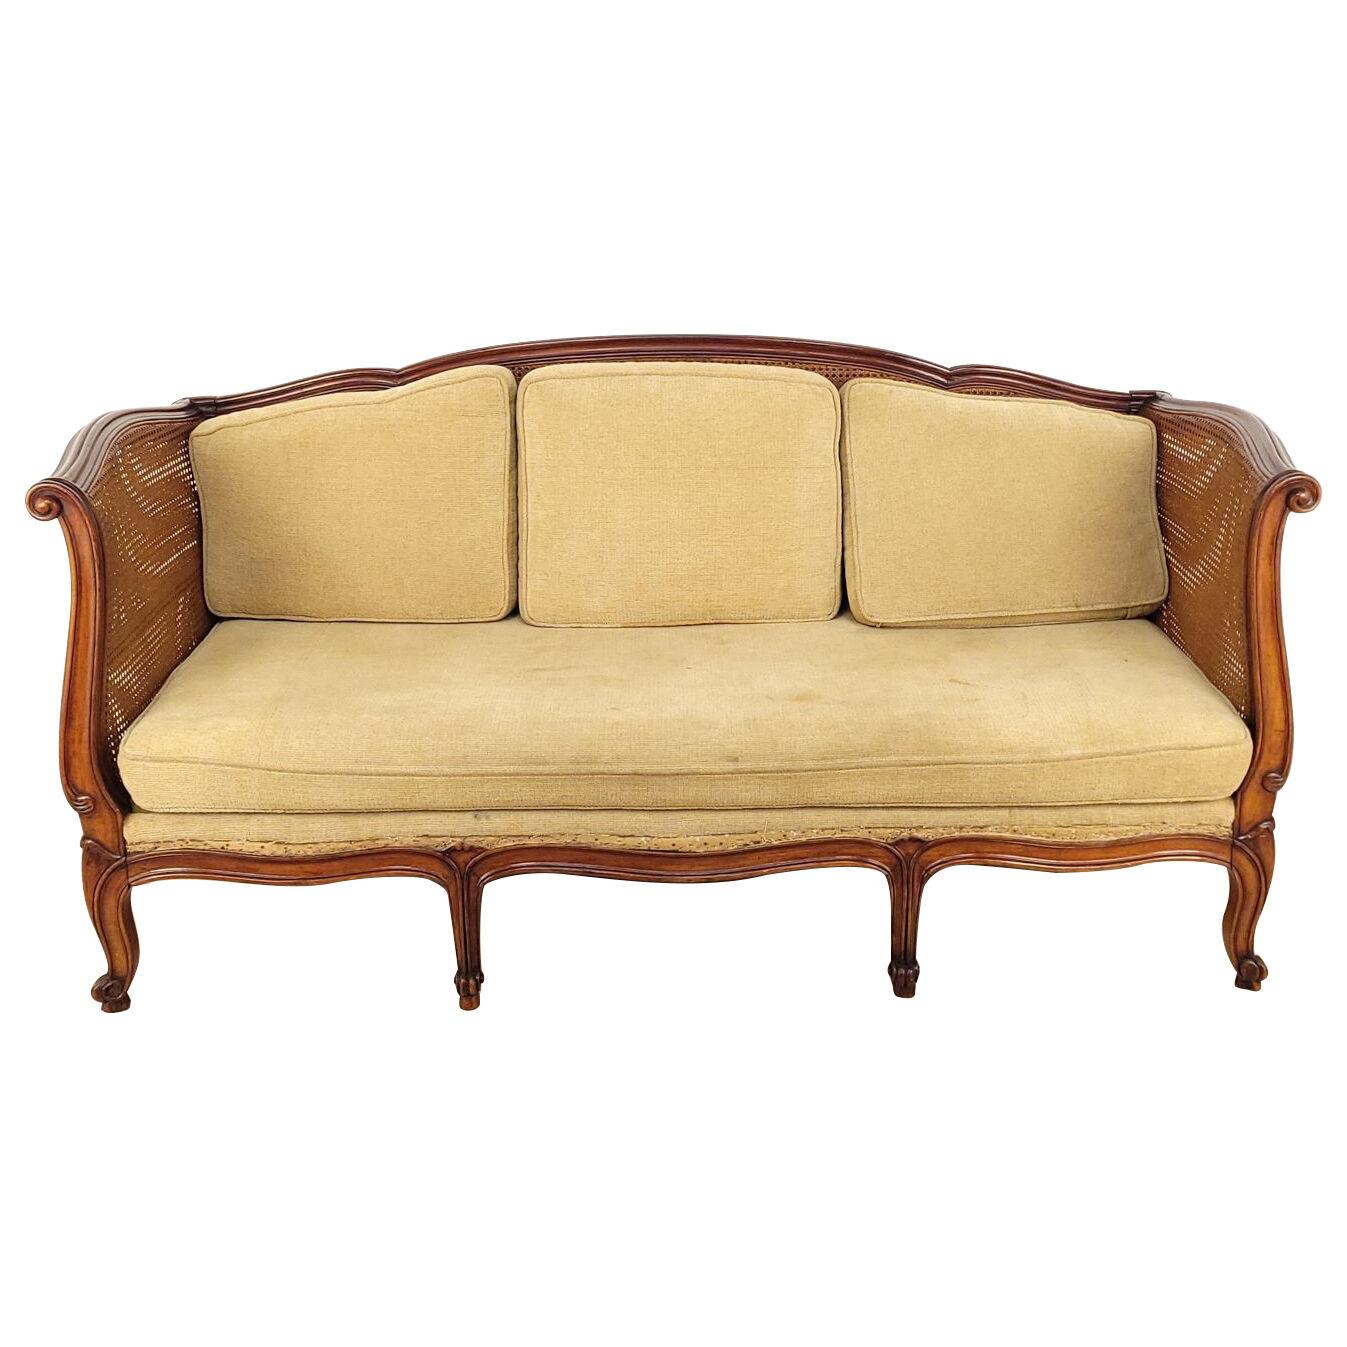 Walnut Louis XV–Style Daybed or Sofa, circa 1850